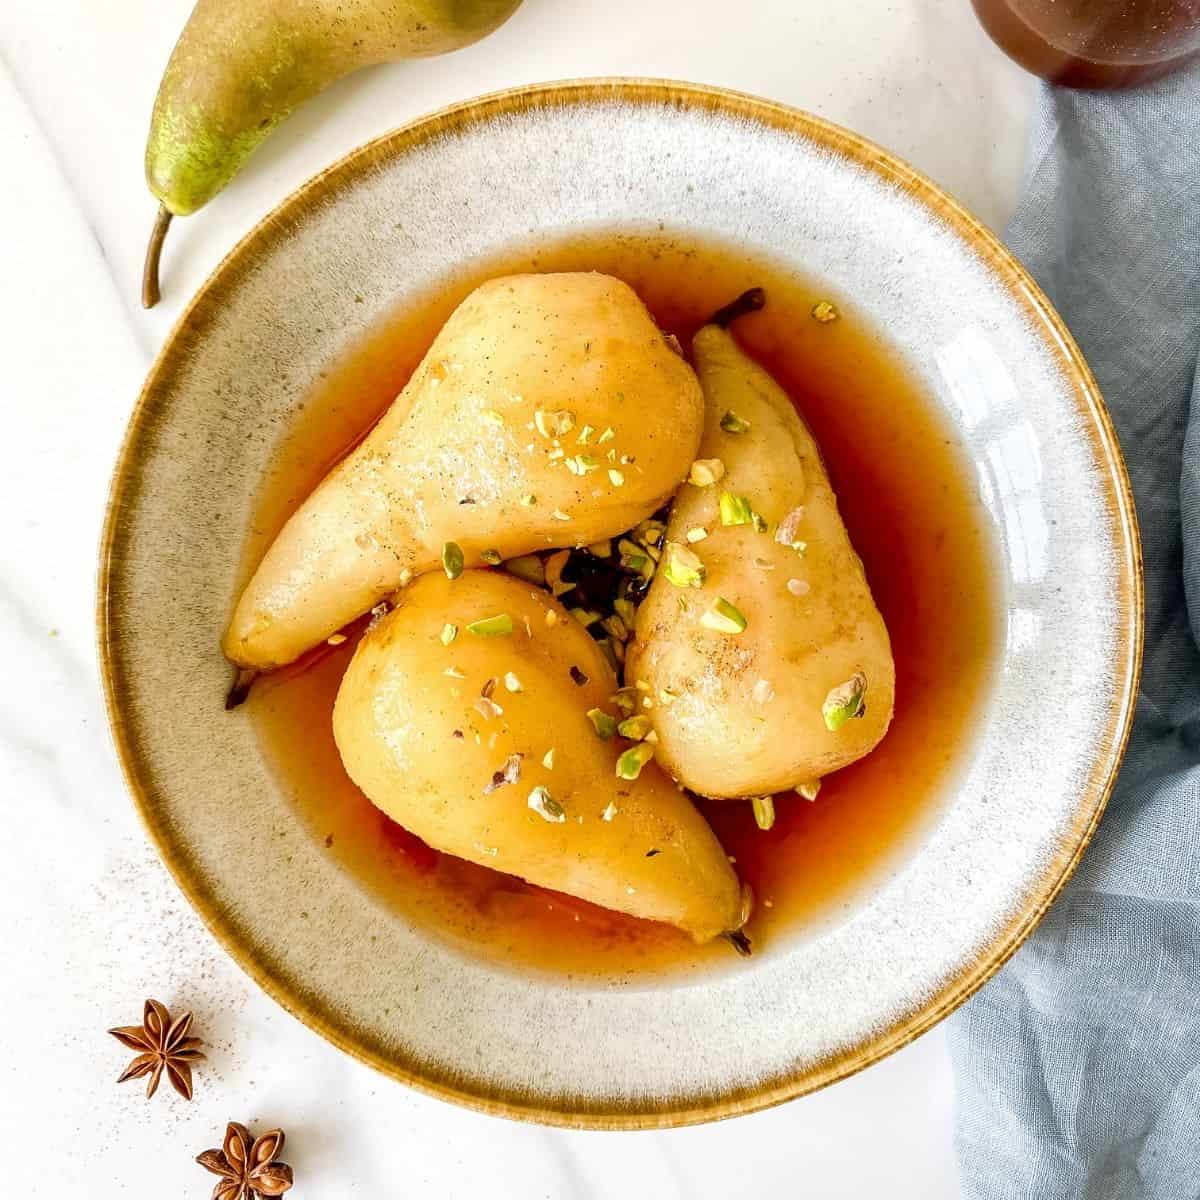 Spiced Poached Pears (sweetened with apple juice)